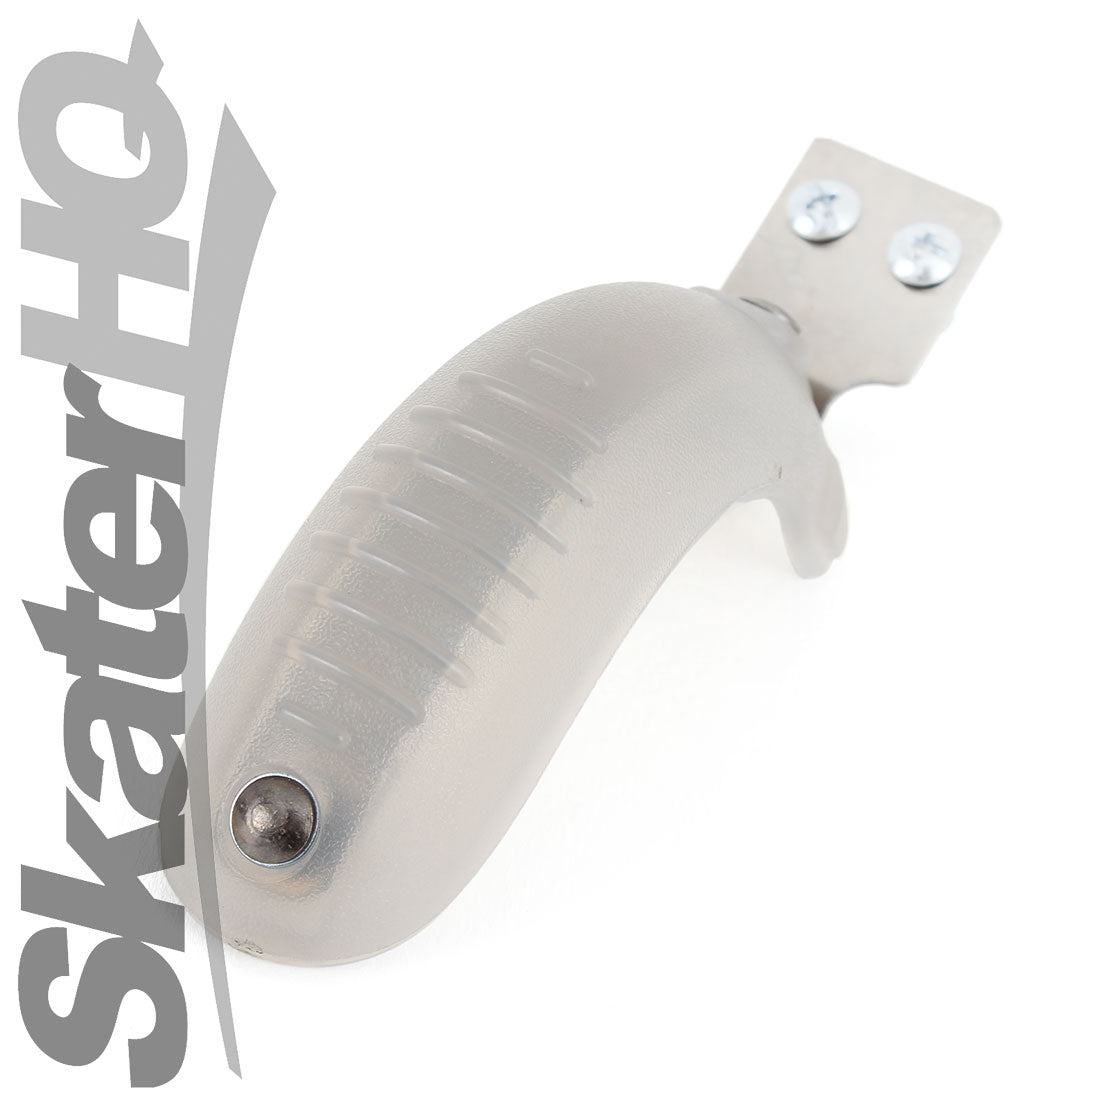 Micro Mini Deluxe Brake 4608 - Grey (for Black) Scooter Hardware and Parts